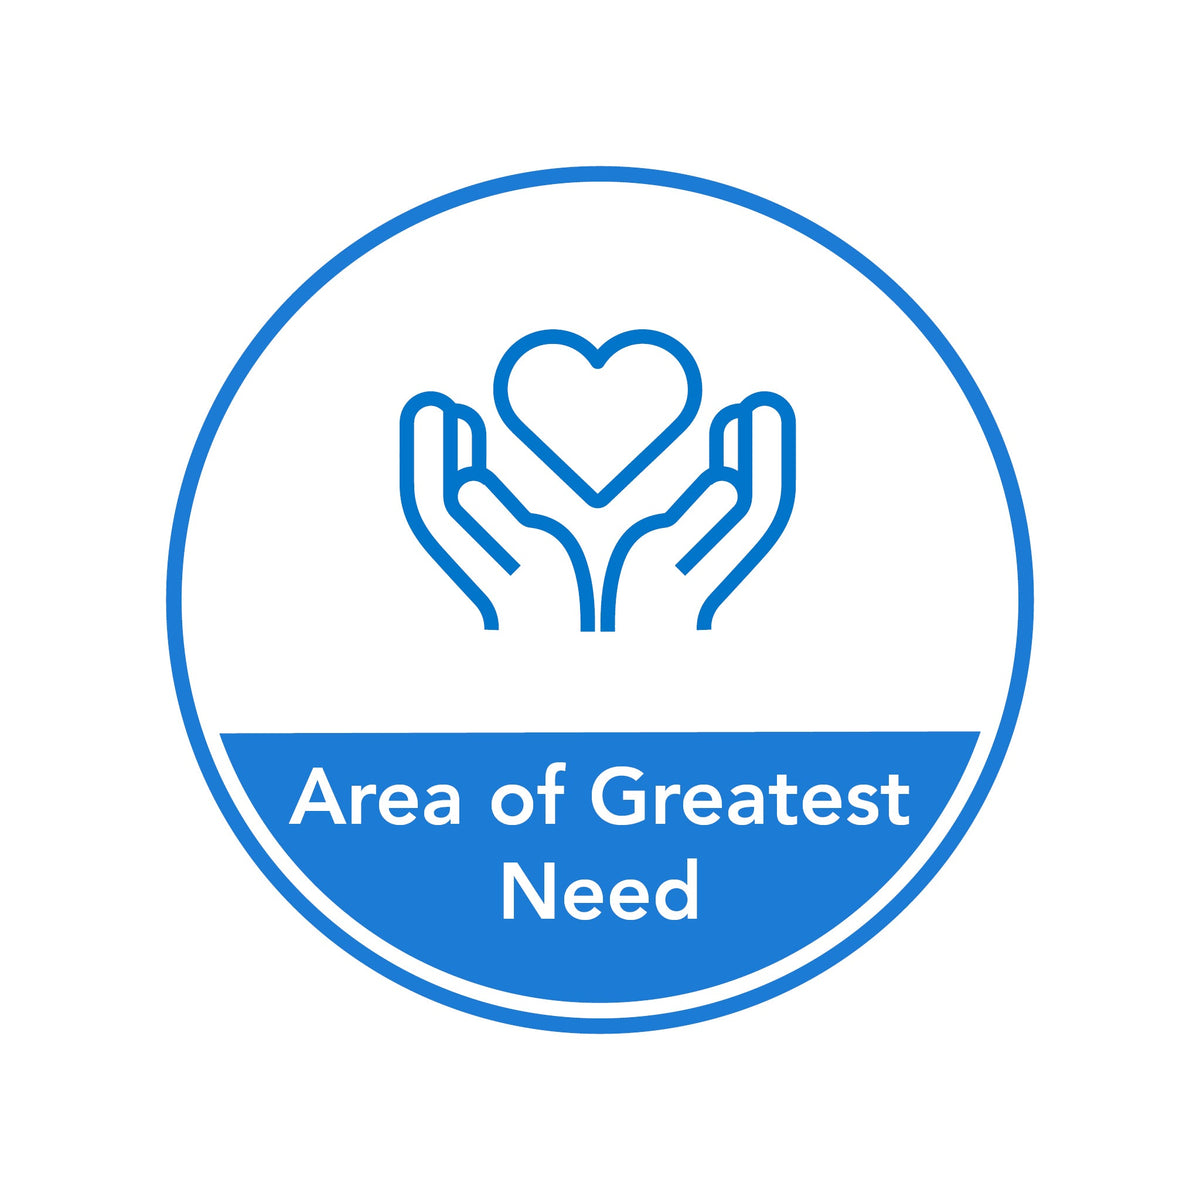 AAD Donation - Where Need is Greatest